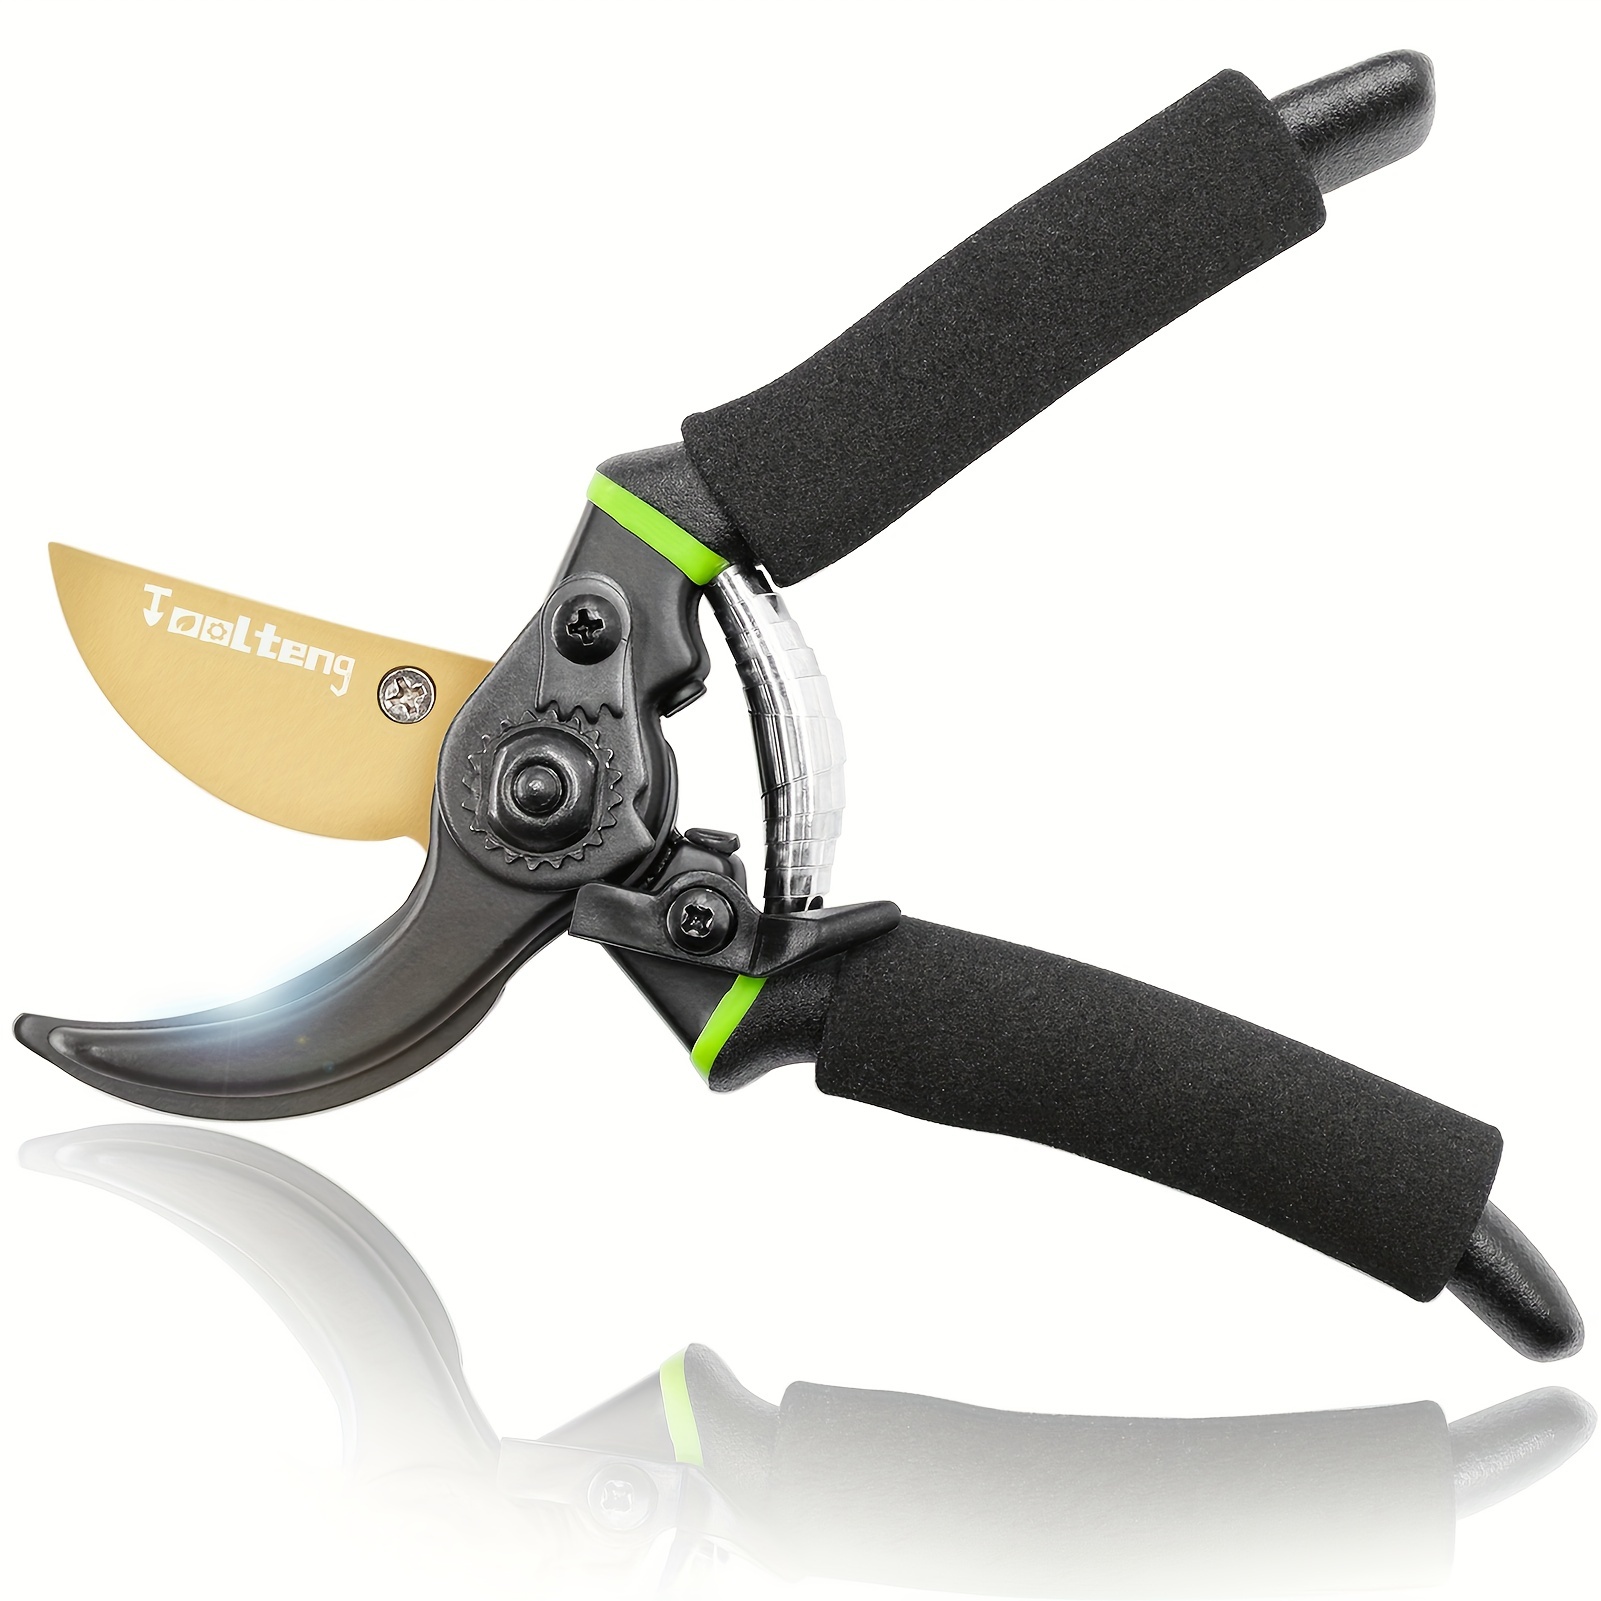 Professional Electric Hand Held Garden Shears for Orchard Trees - BOMA Garden  Tools